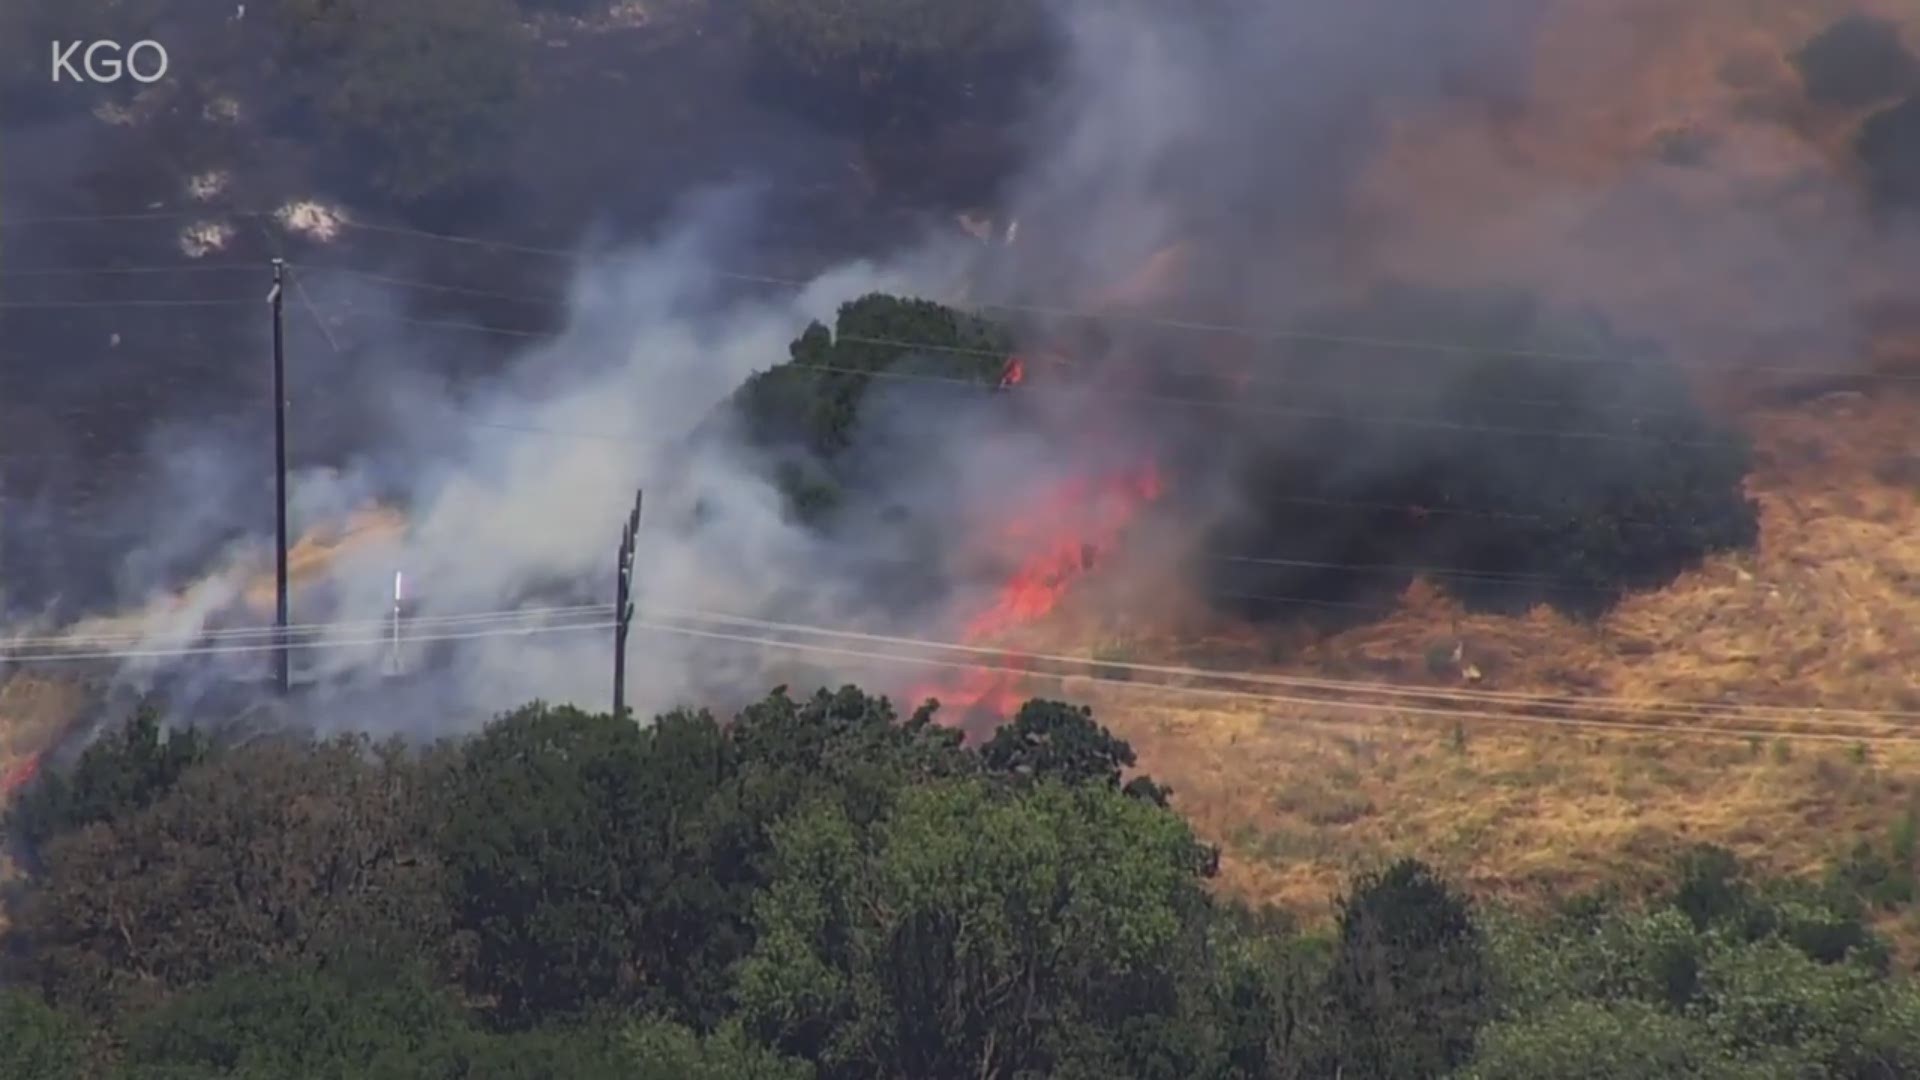 Firefighters are battling a grass fire in the foothills south of Fairfield. The Solano County Sheriff's Office has issued mandatory evacuations in the area of Cordelia Road.